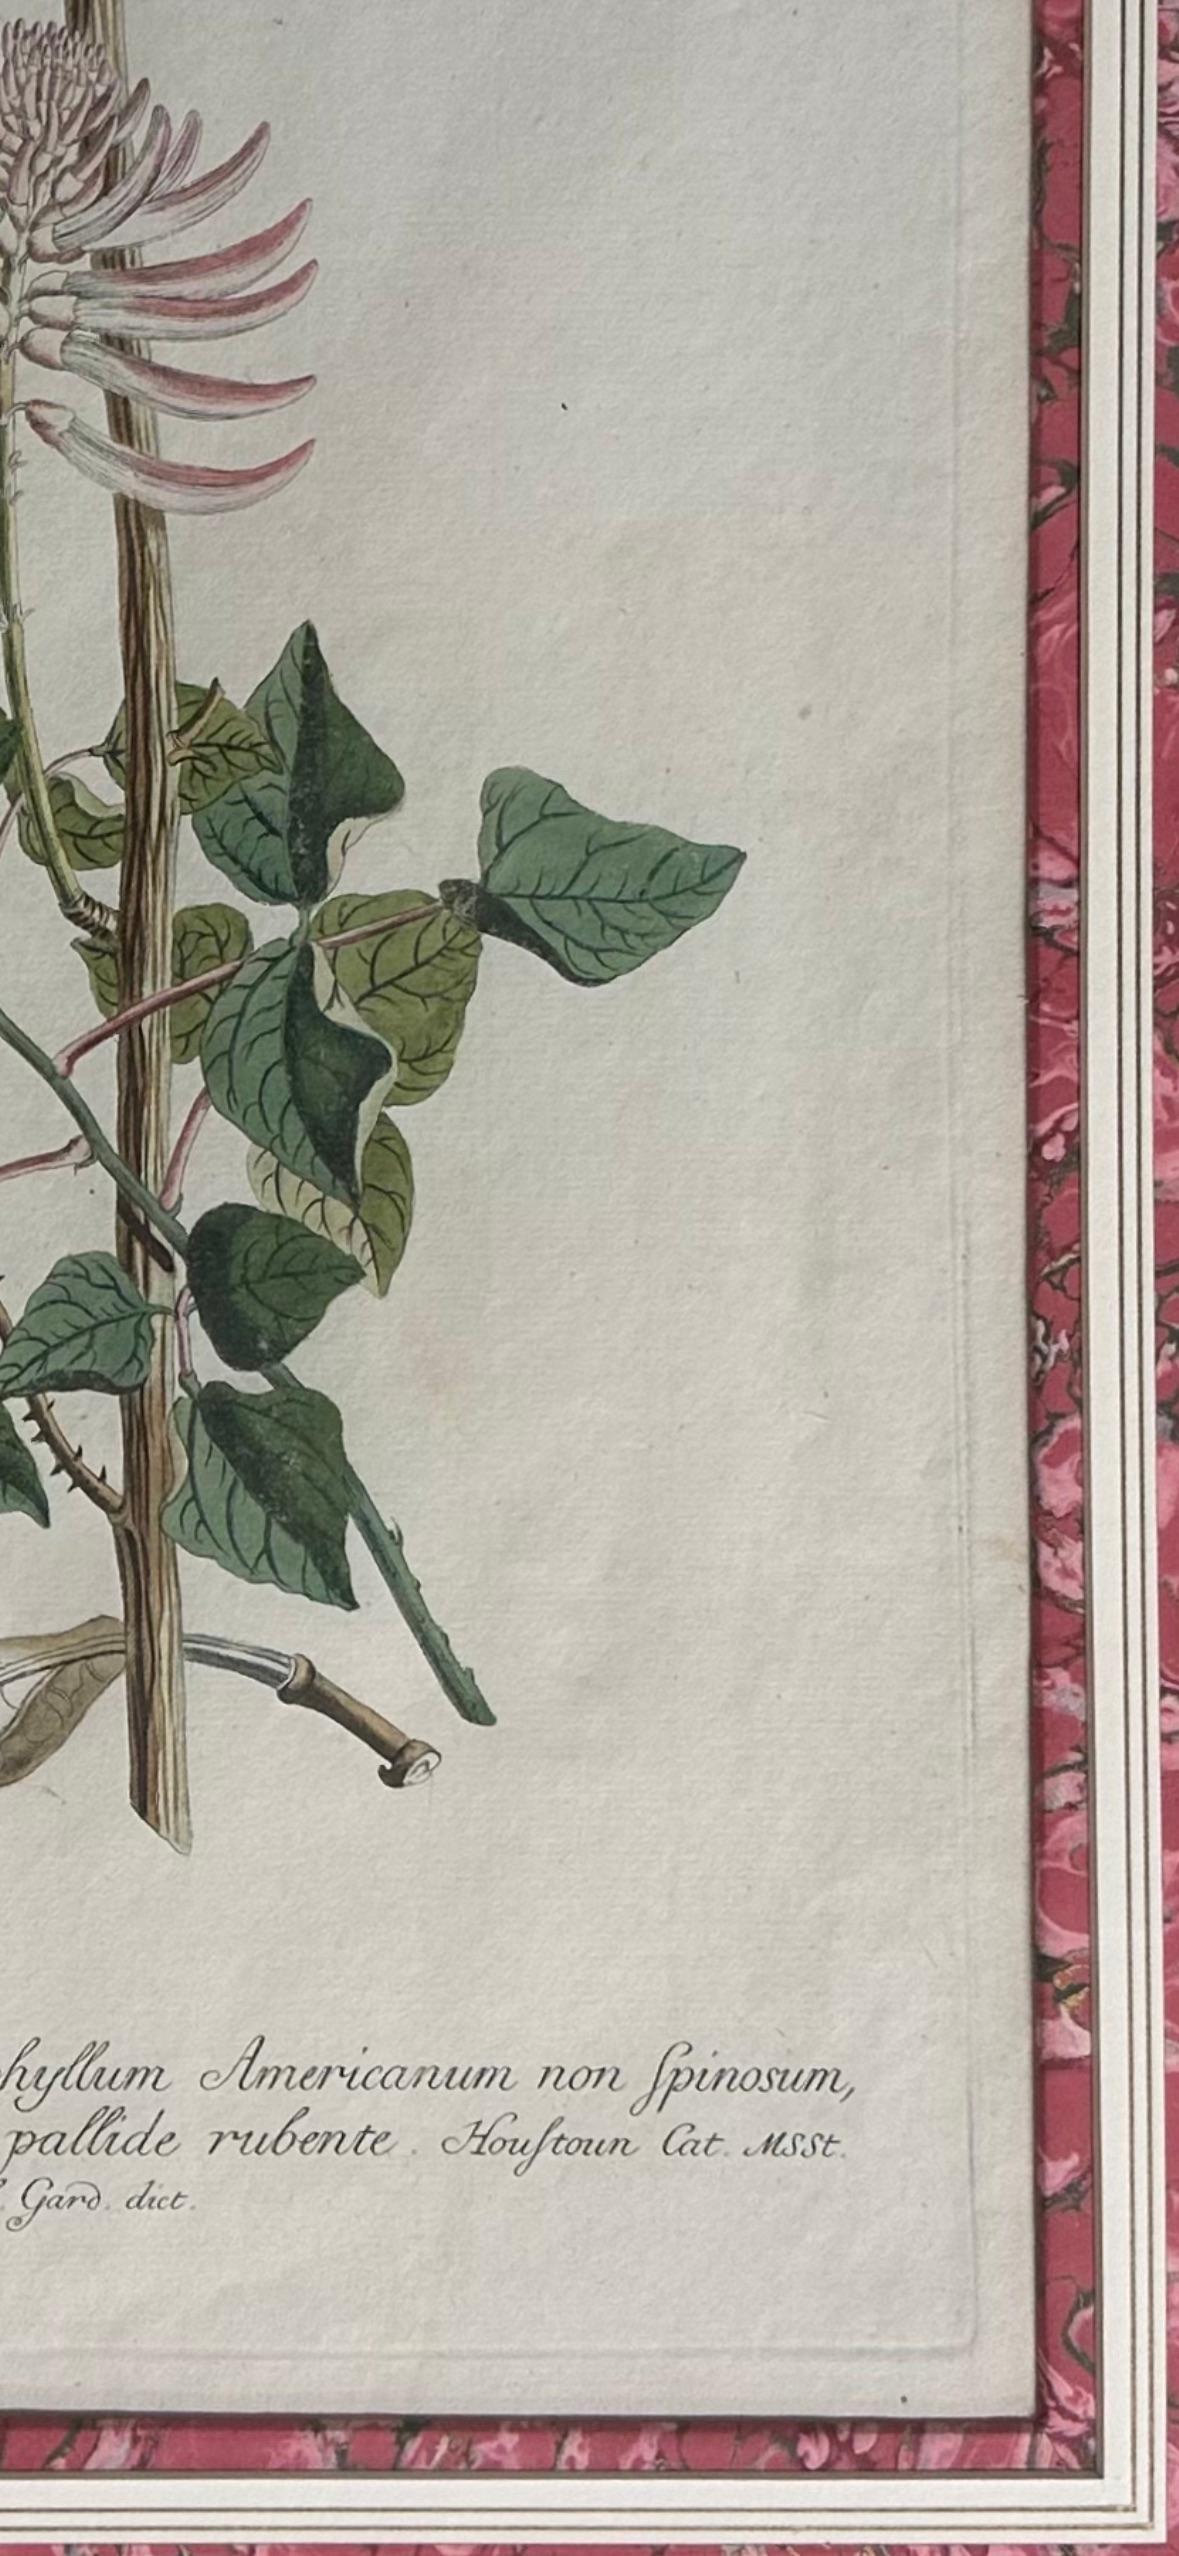 Gilt 18th Century hand-colored copper plate engraved botanical prints.